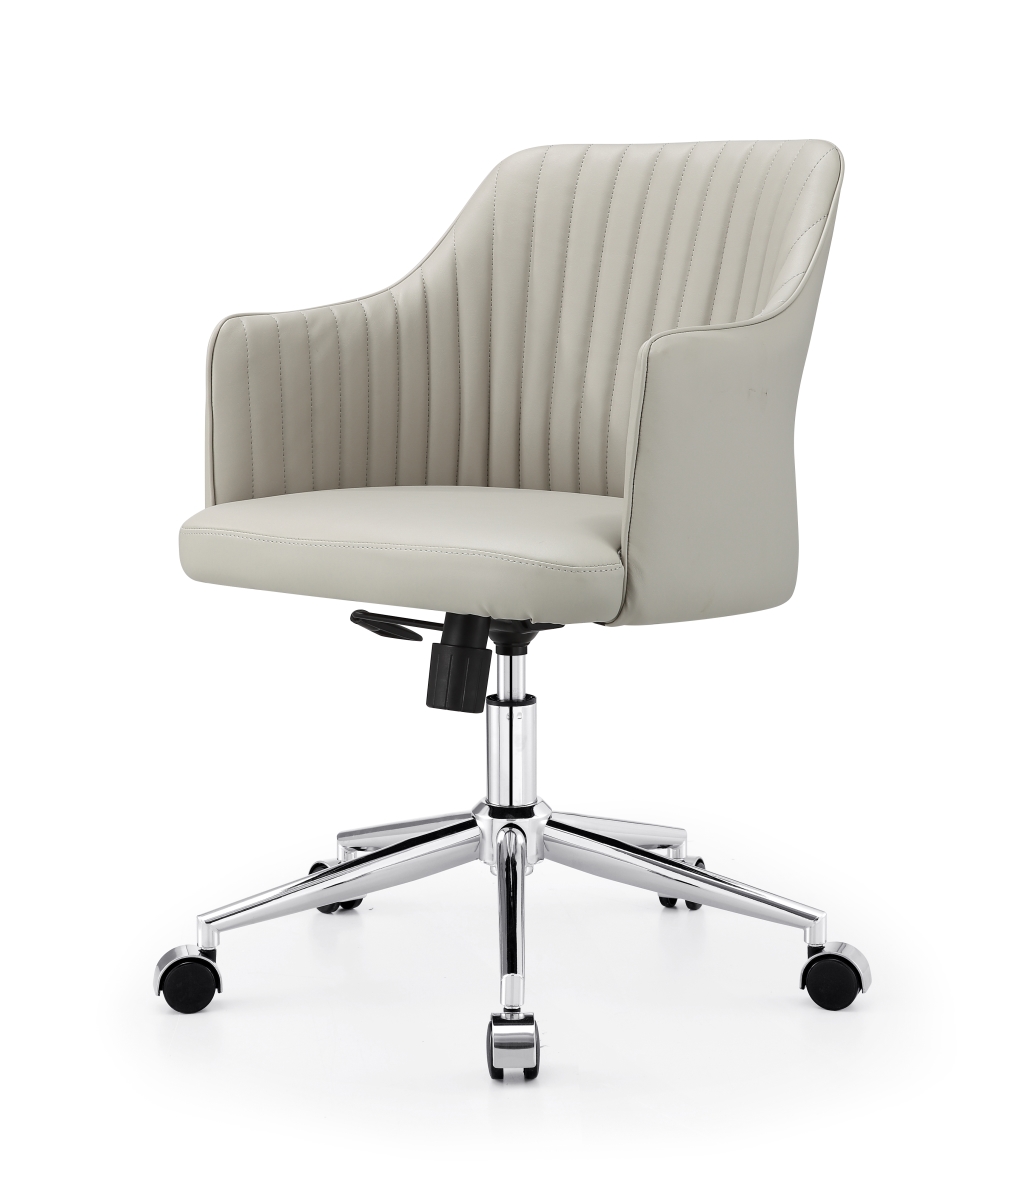 64-gry M64 Flock Office Chair In Vegan Leather - Chrome & Gray